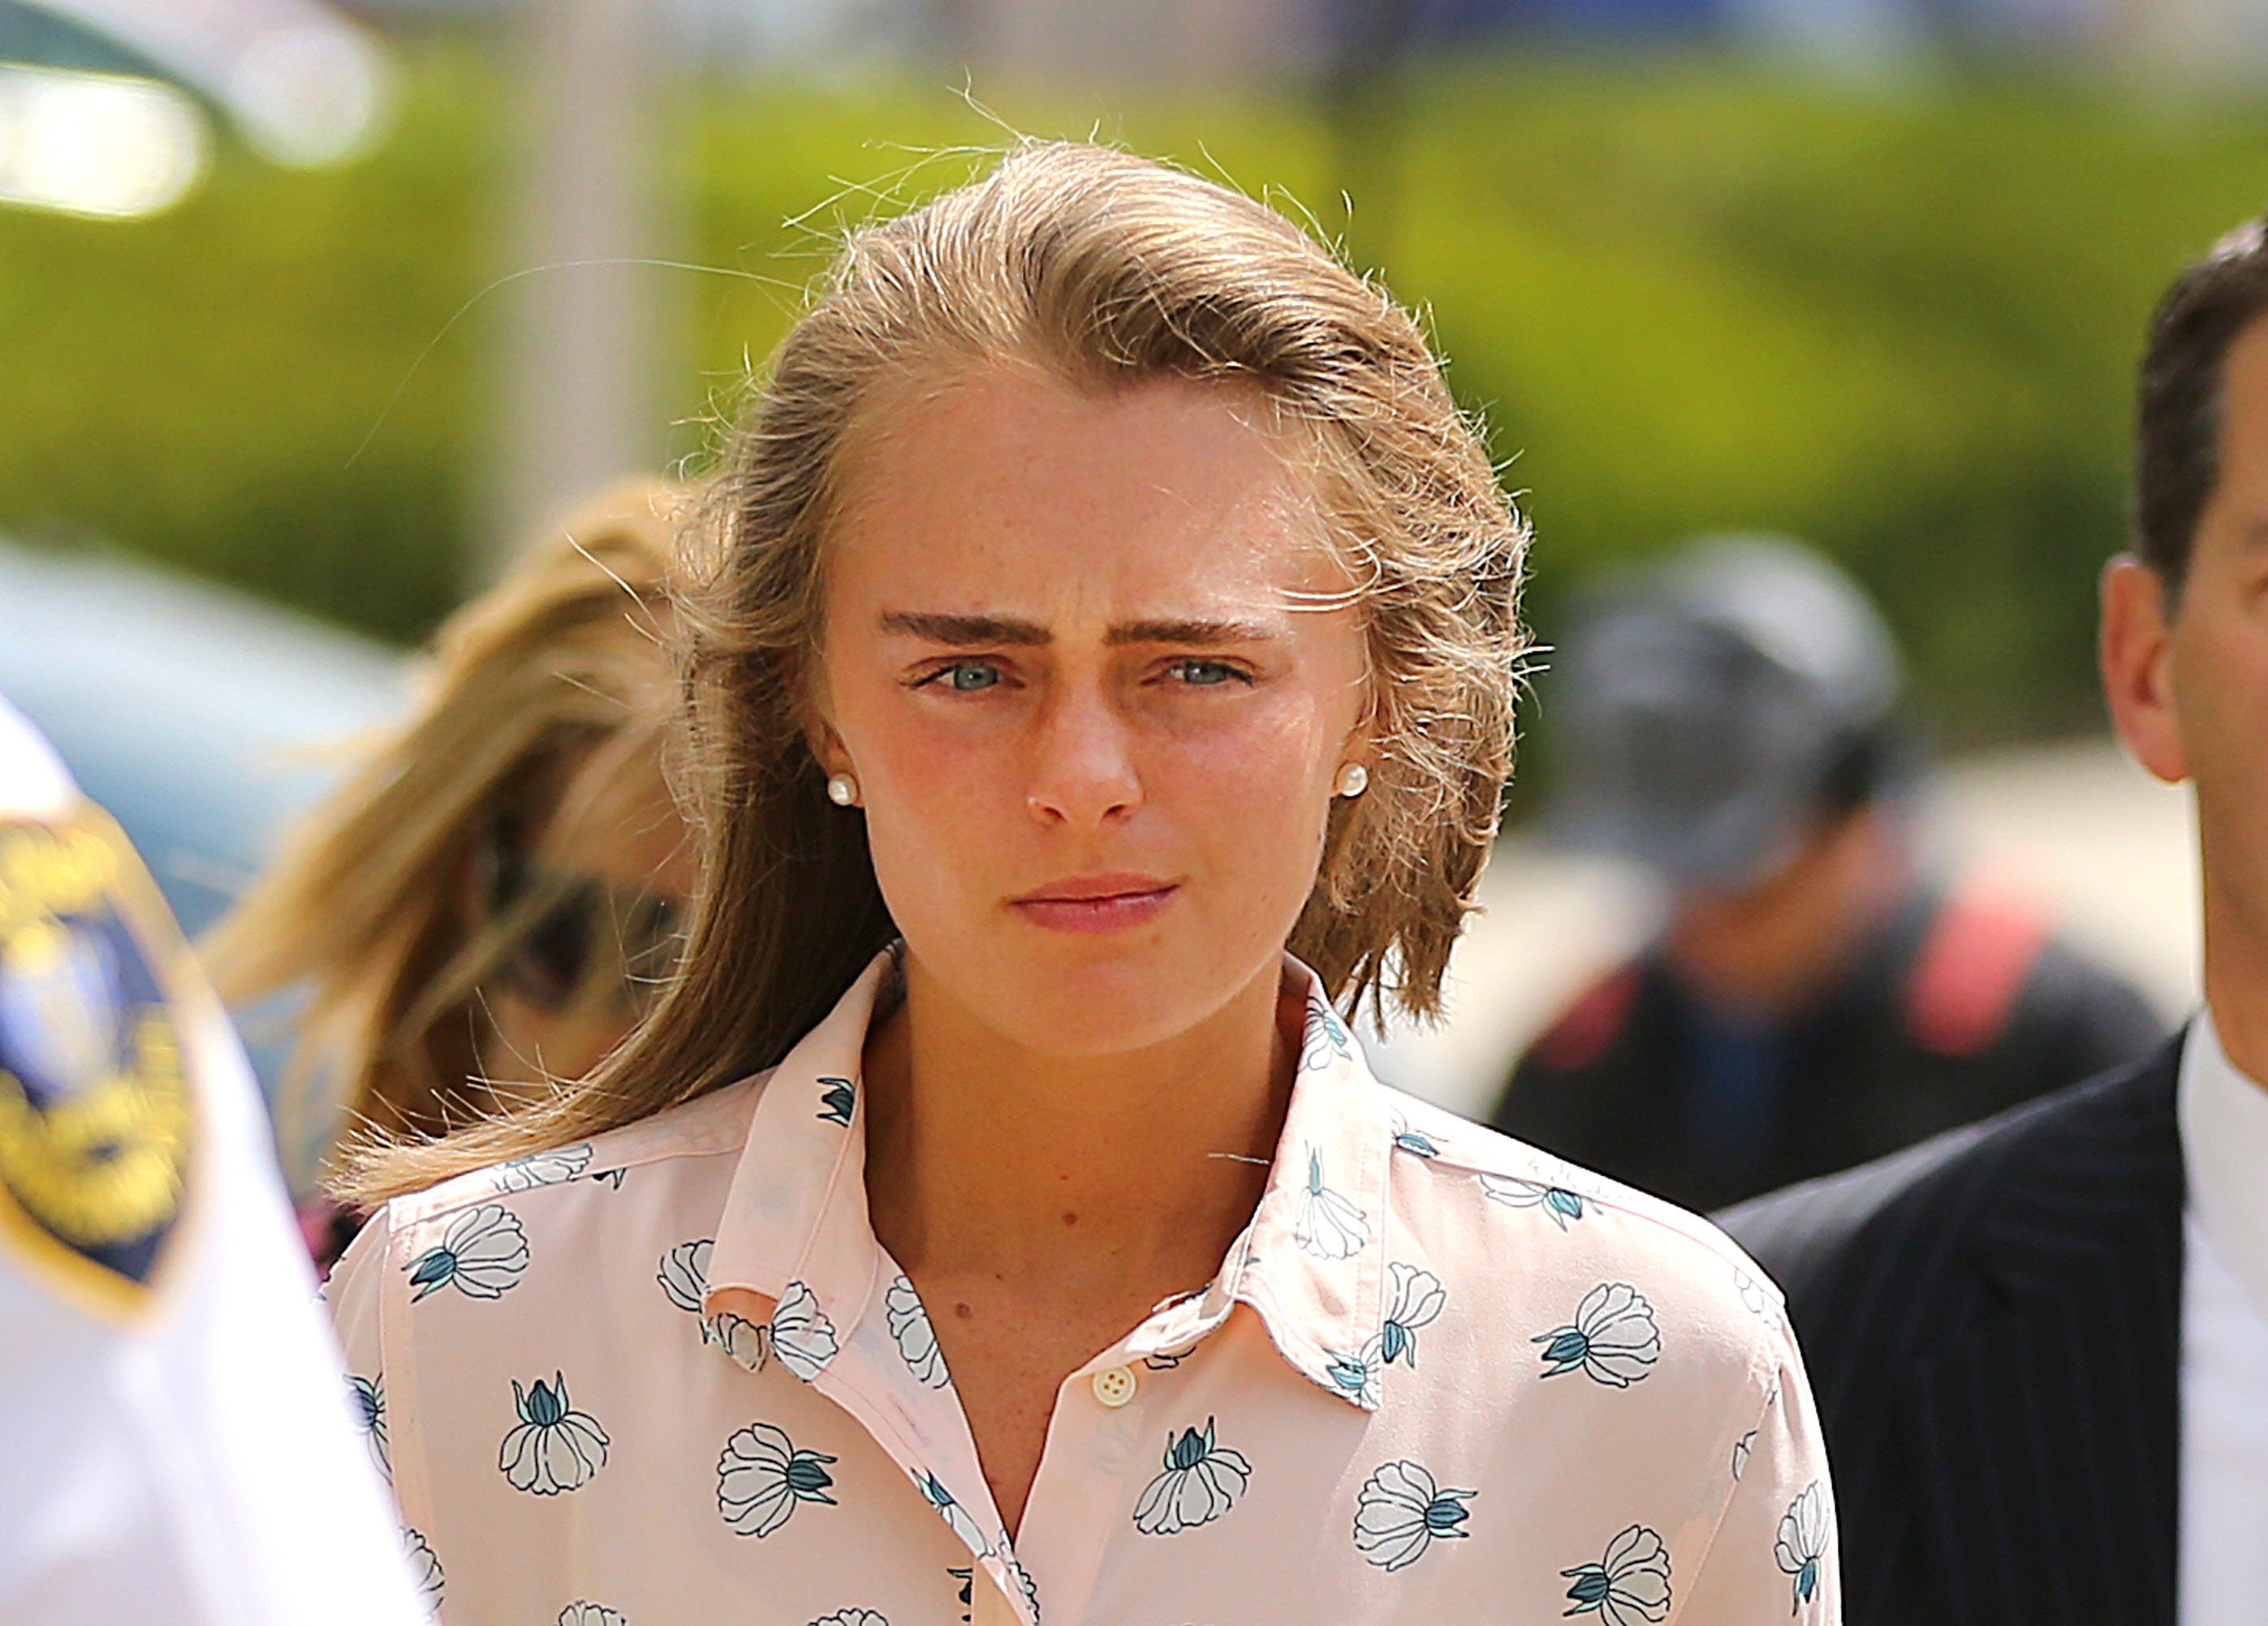 Michelle Carter, wearing a pink button-down shirt, arrives at court in 2017